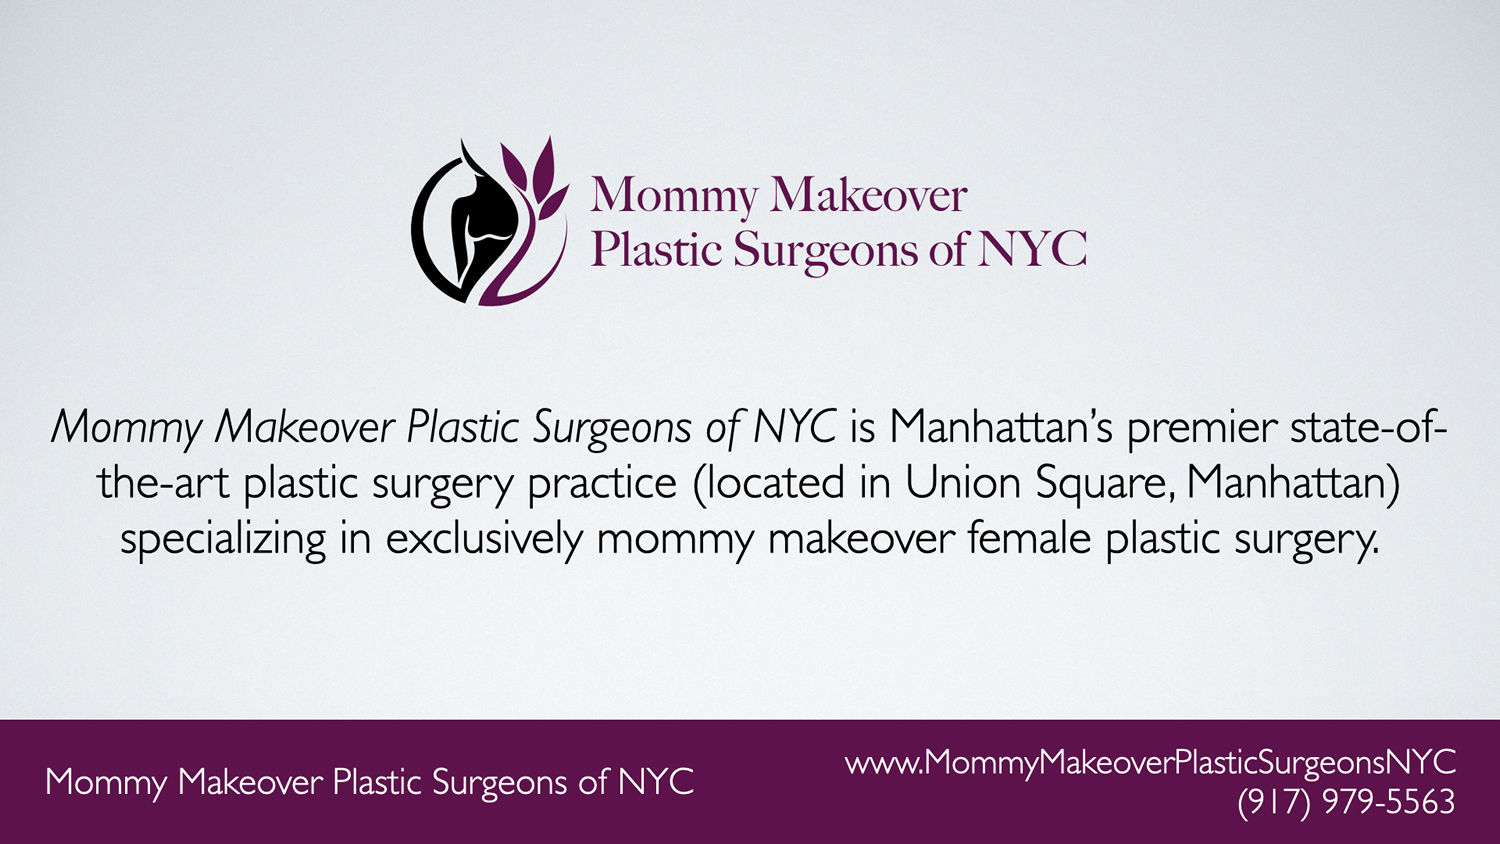 Mommy Makeover Plastic Surgeons of NYC Information